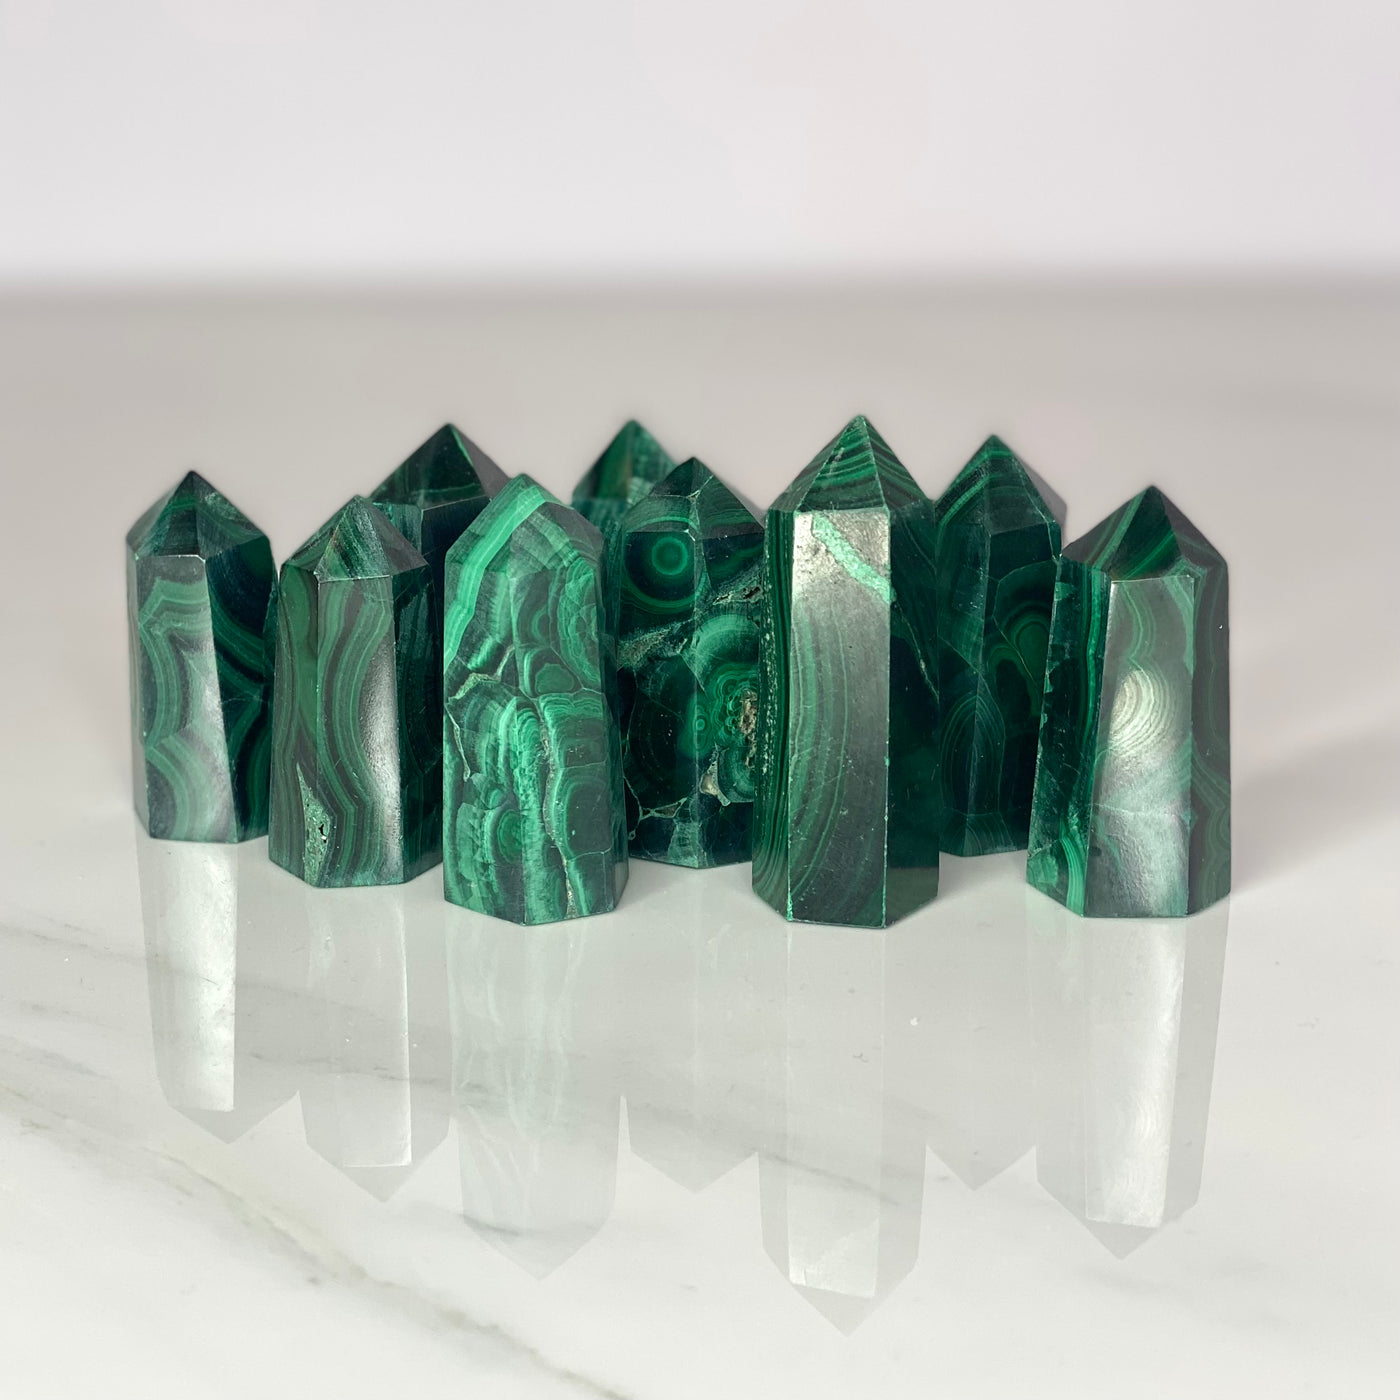 Small Malachite Points: Harness the Vibrant Energy of Malachite in Petite Form